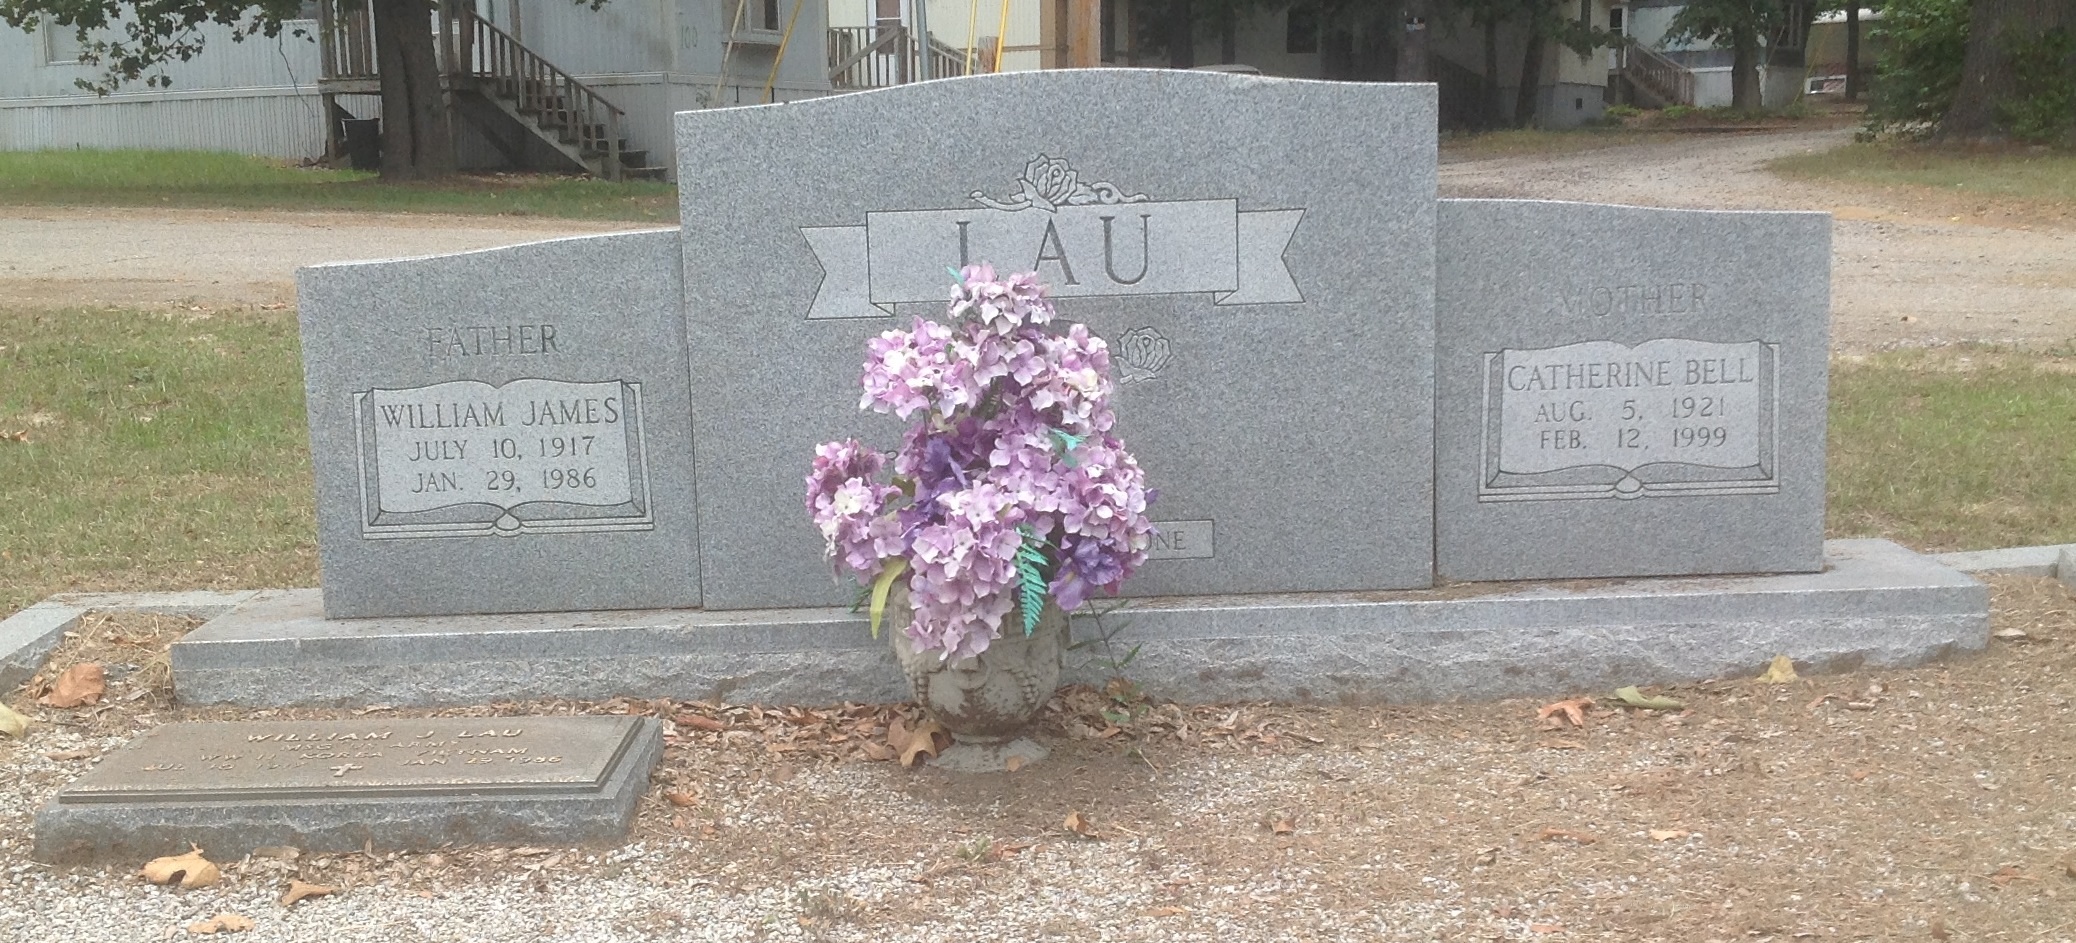 Catherine Bell Lau Grave